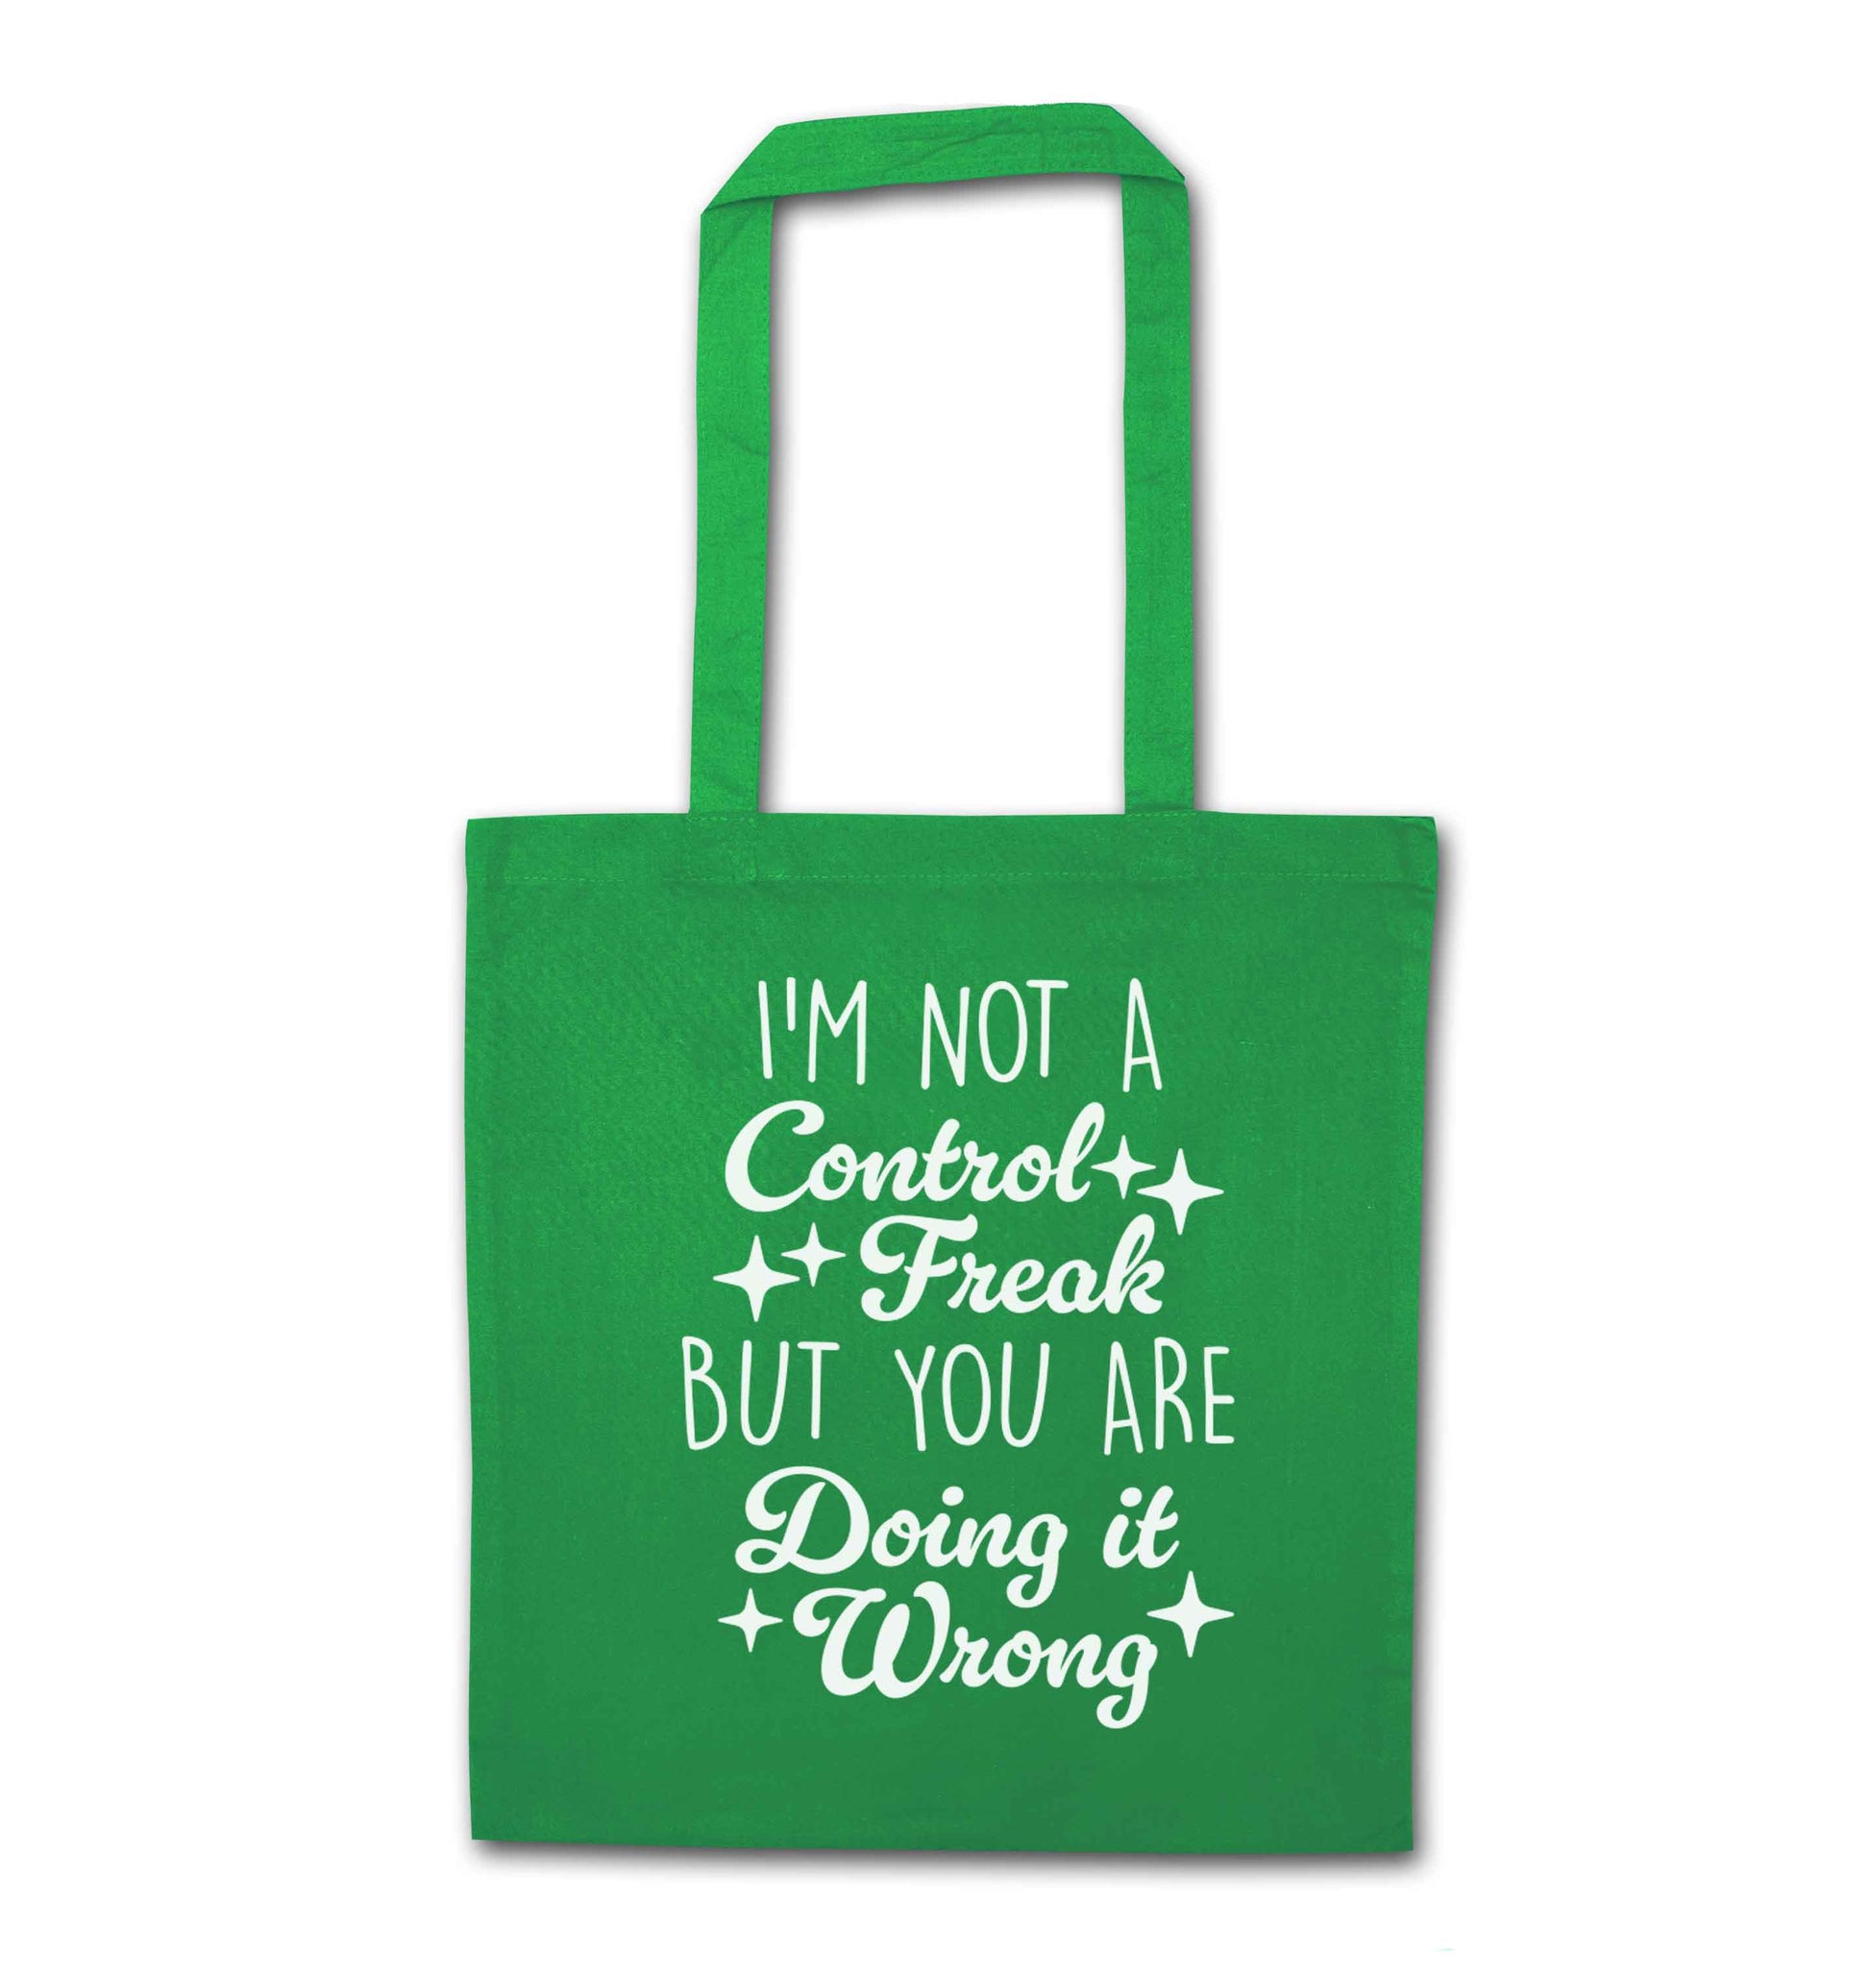 I'm not a control freak but you are doing it wrong green tote bag